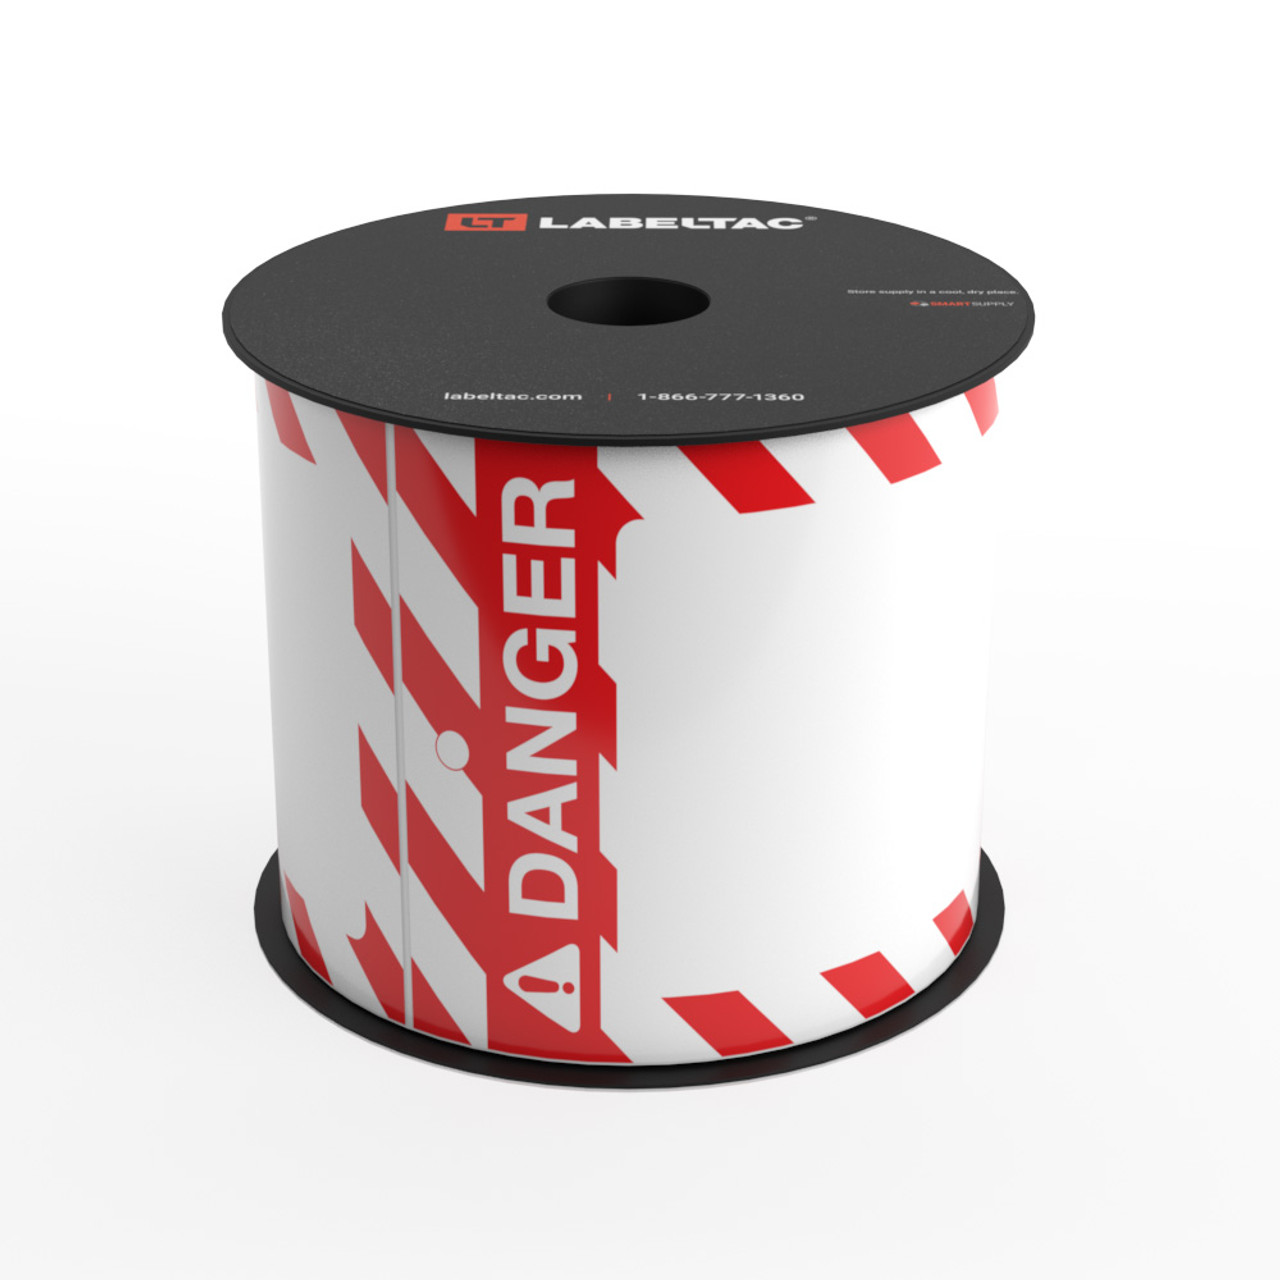 LabelTac® Danger Tag - Safety Red and White Stripes - Safety Green -  Printable Tag Roll